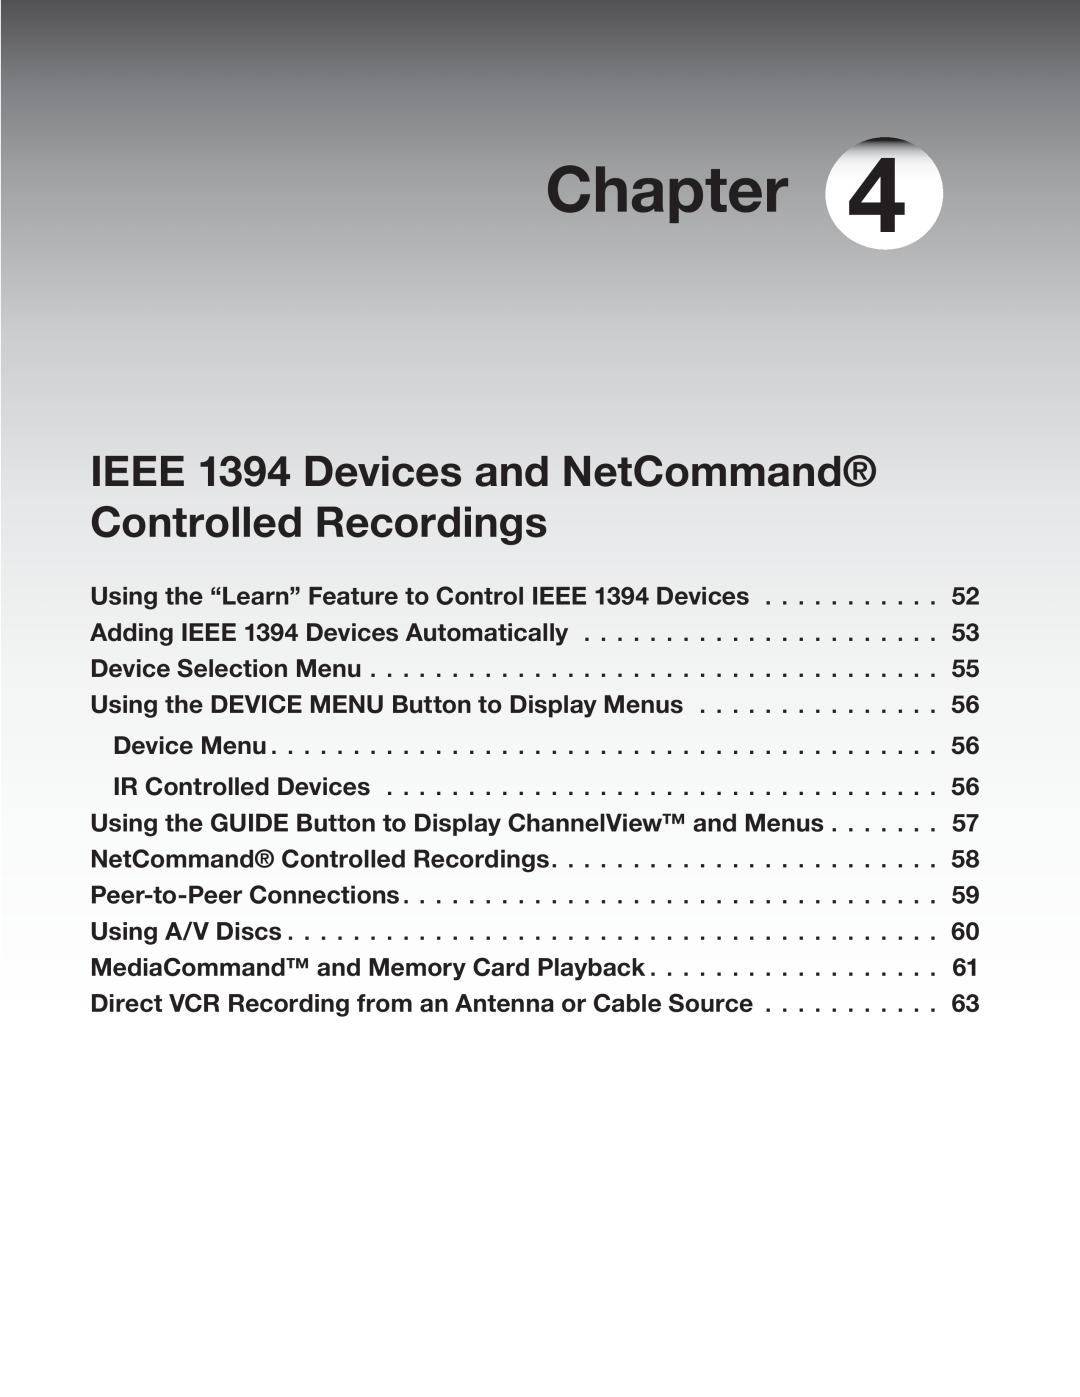 Mitsubishi Electronics LT-3780, LT-3280 manual IEEE 1394 Devices and NetCommand Controlled Recordings, Chapter 